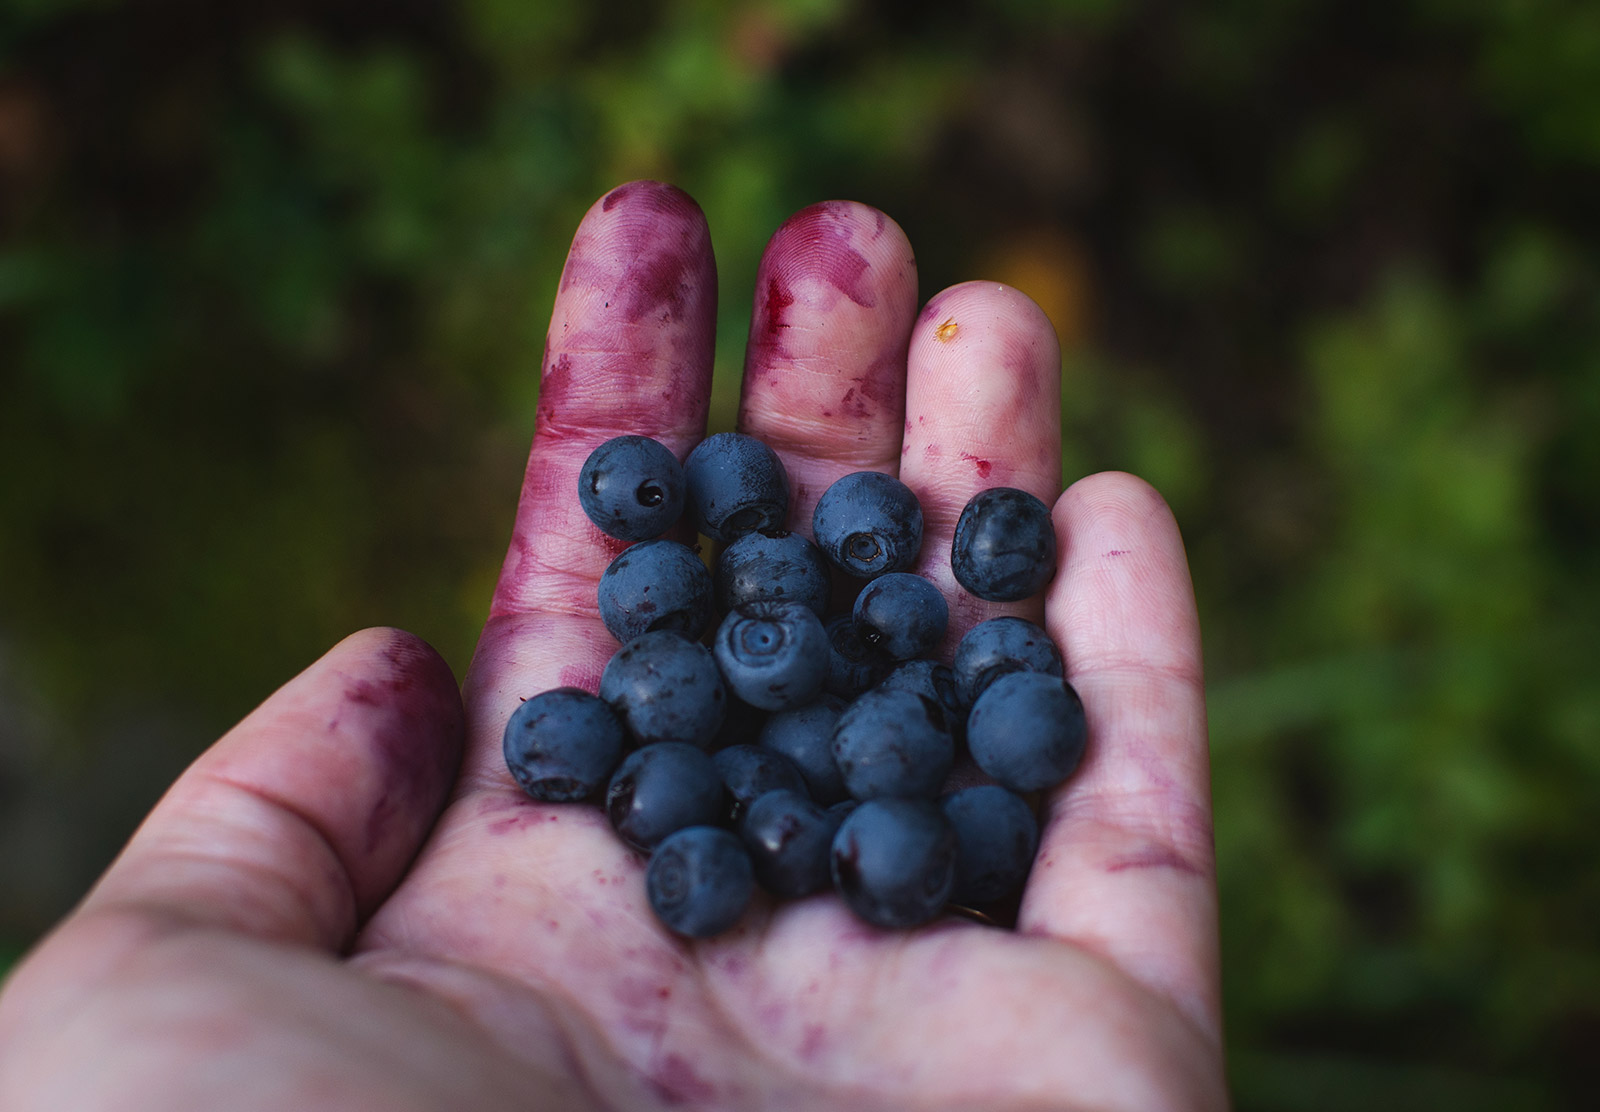 Blueberries in hand